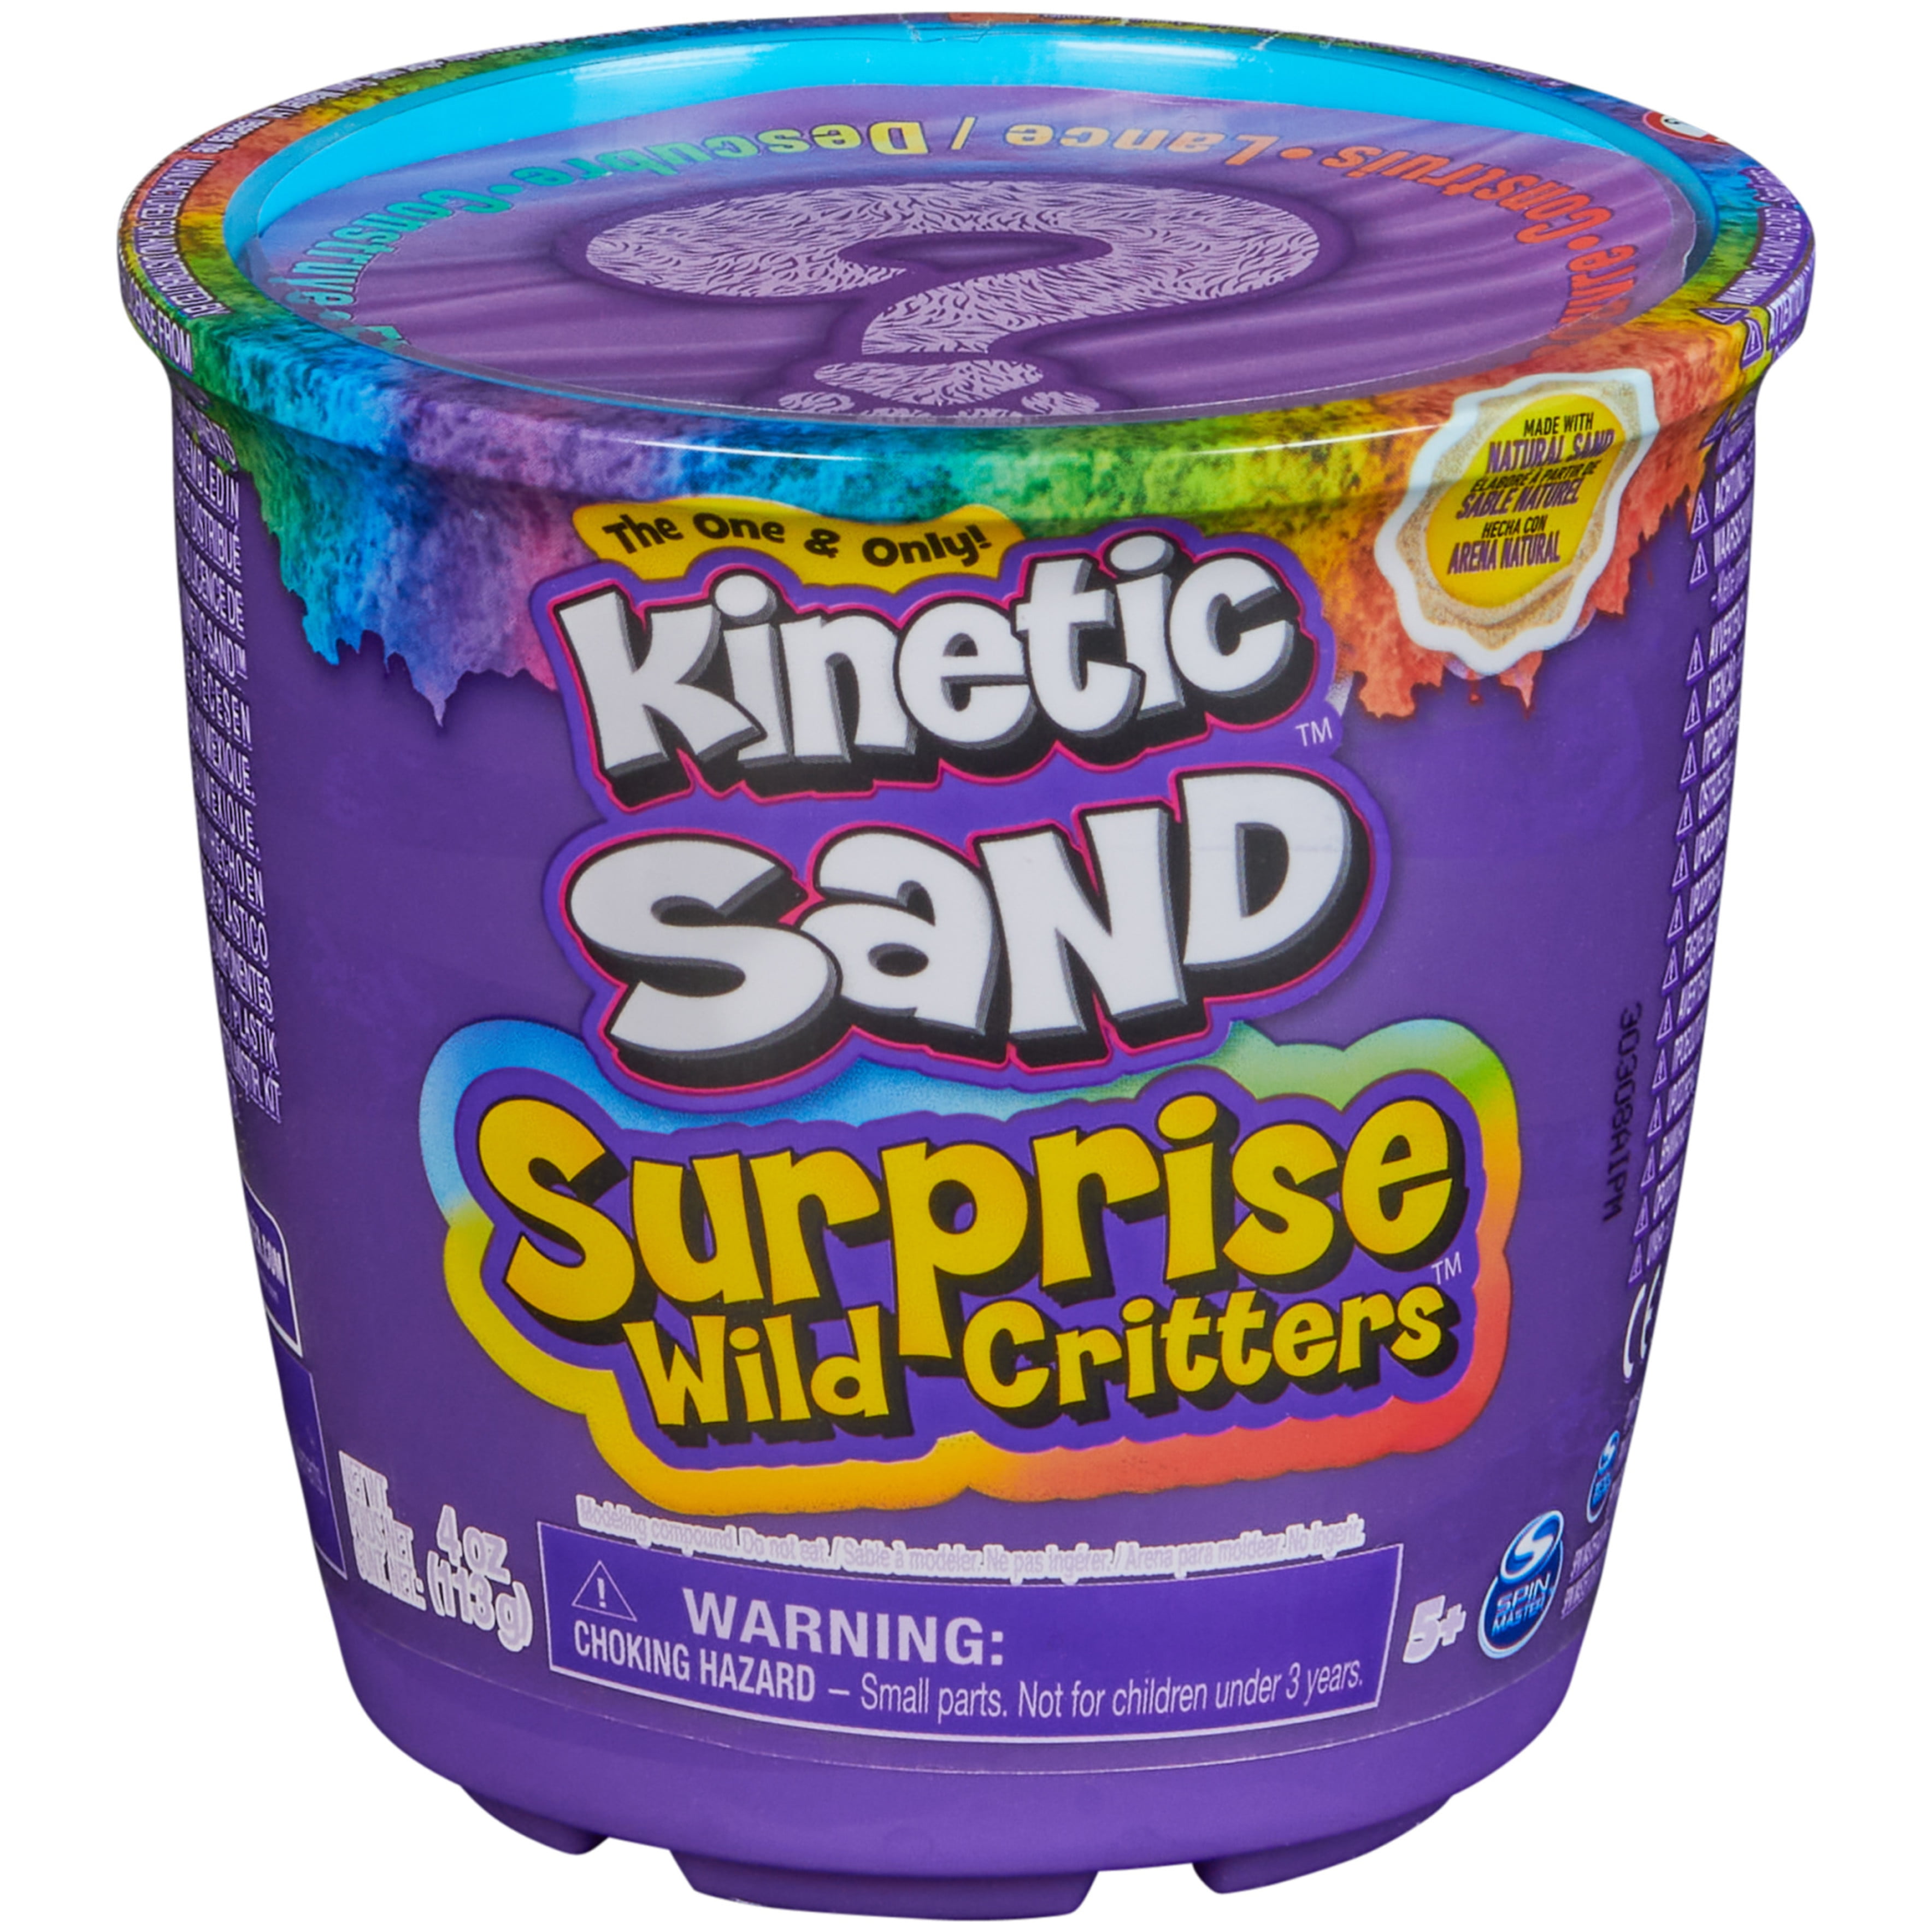  Kinetic Sand, 2.5lbs Blue Play Sand, Moldable Sensory Toys for  Kids, Resealable Bag, Ages 3+ : Toys & Games